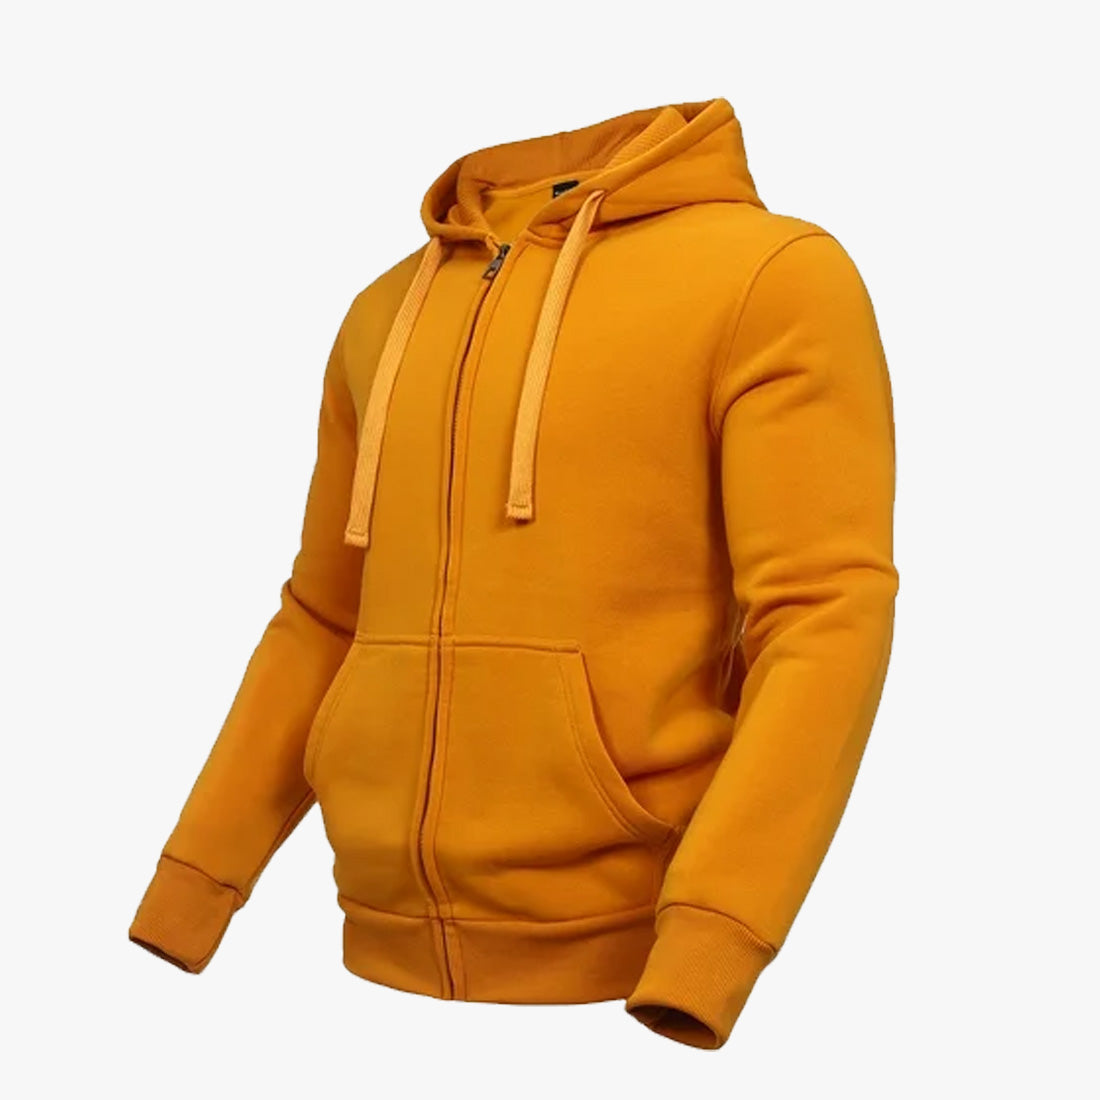 UNITED TEXTILE HIGH-QUALITY FULL ZIP UP HOODIES - 4943